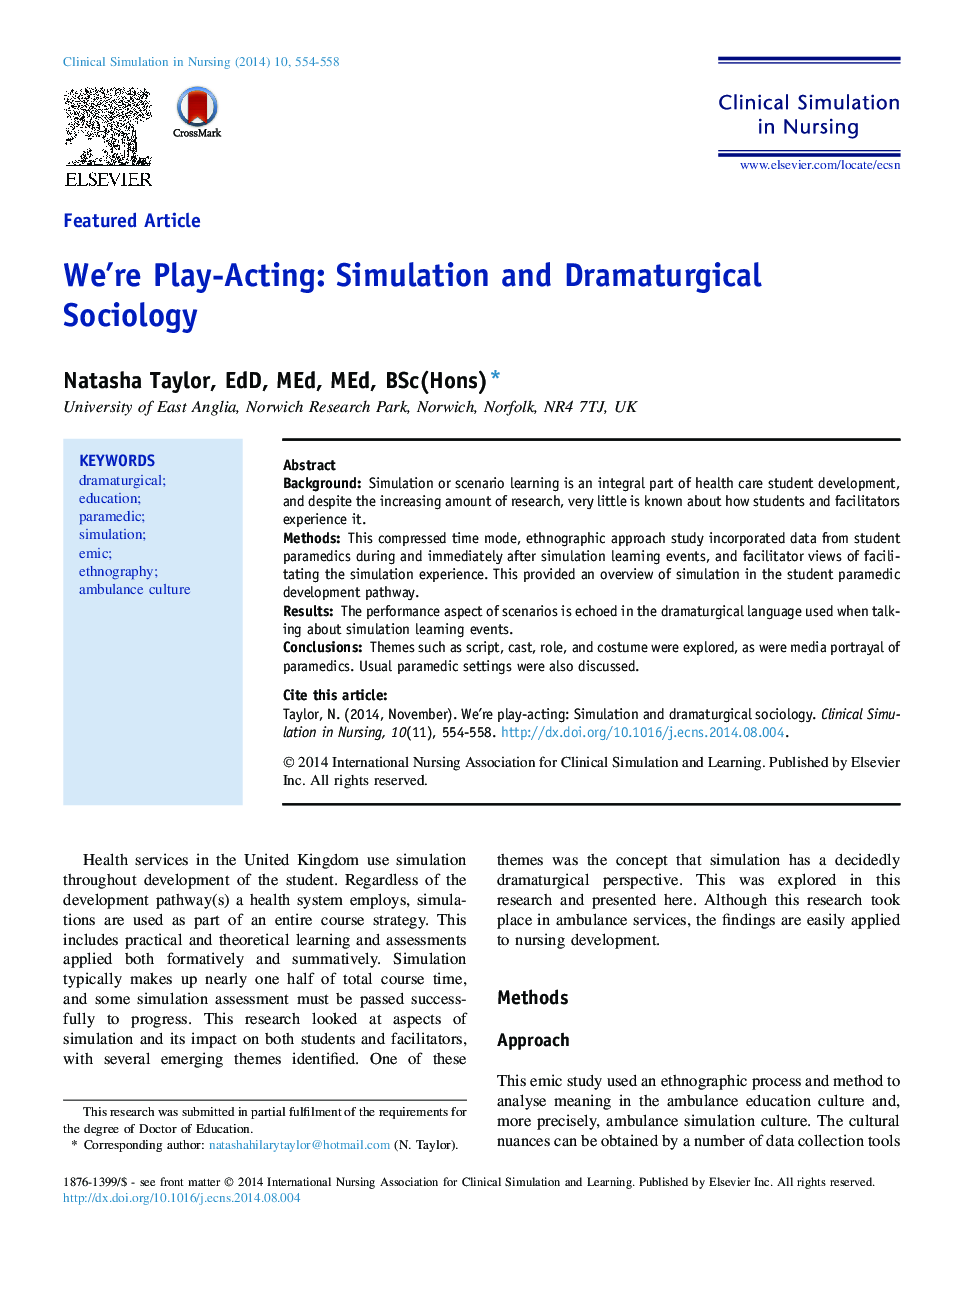 We're Play-Acting: Simulation and Dramaturgical Sociology 